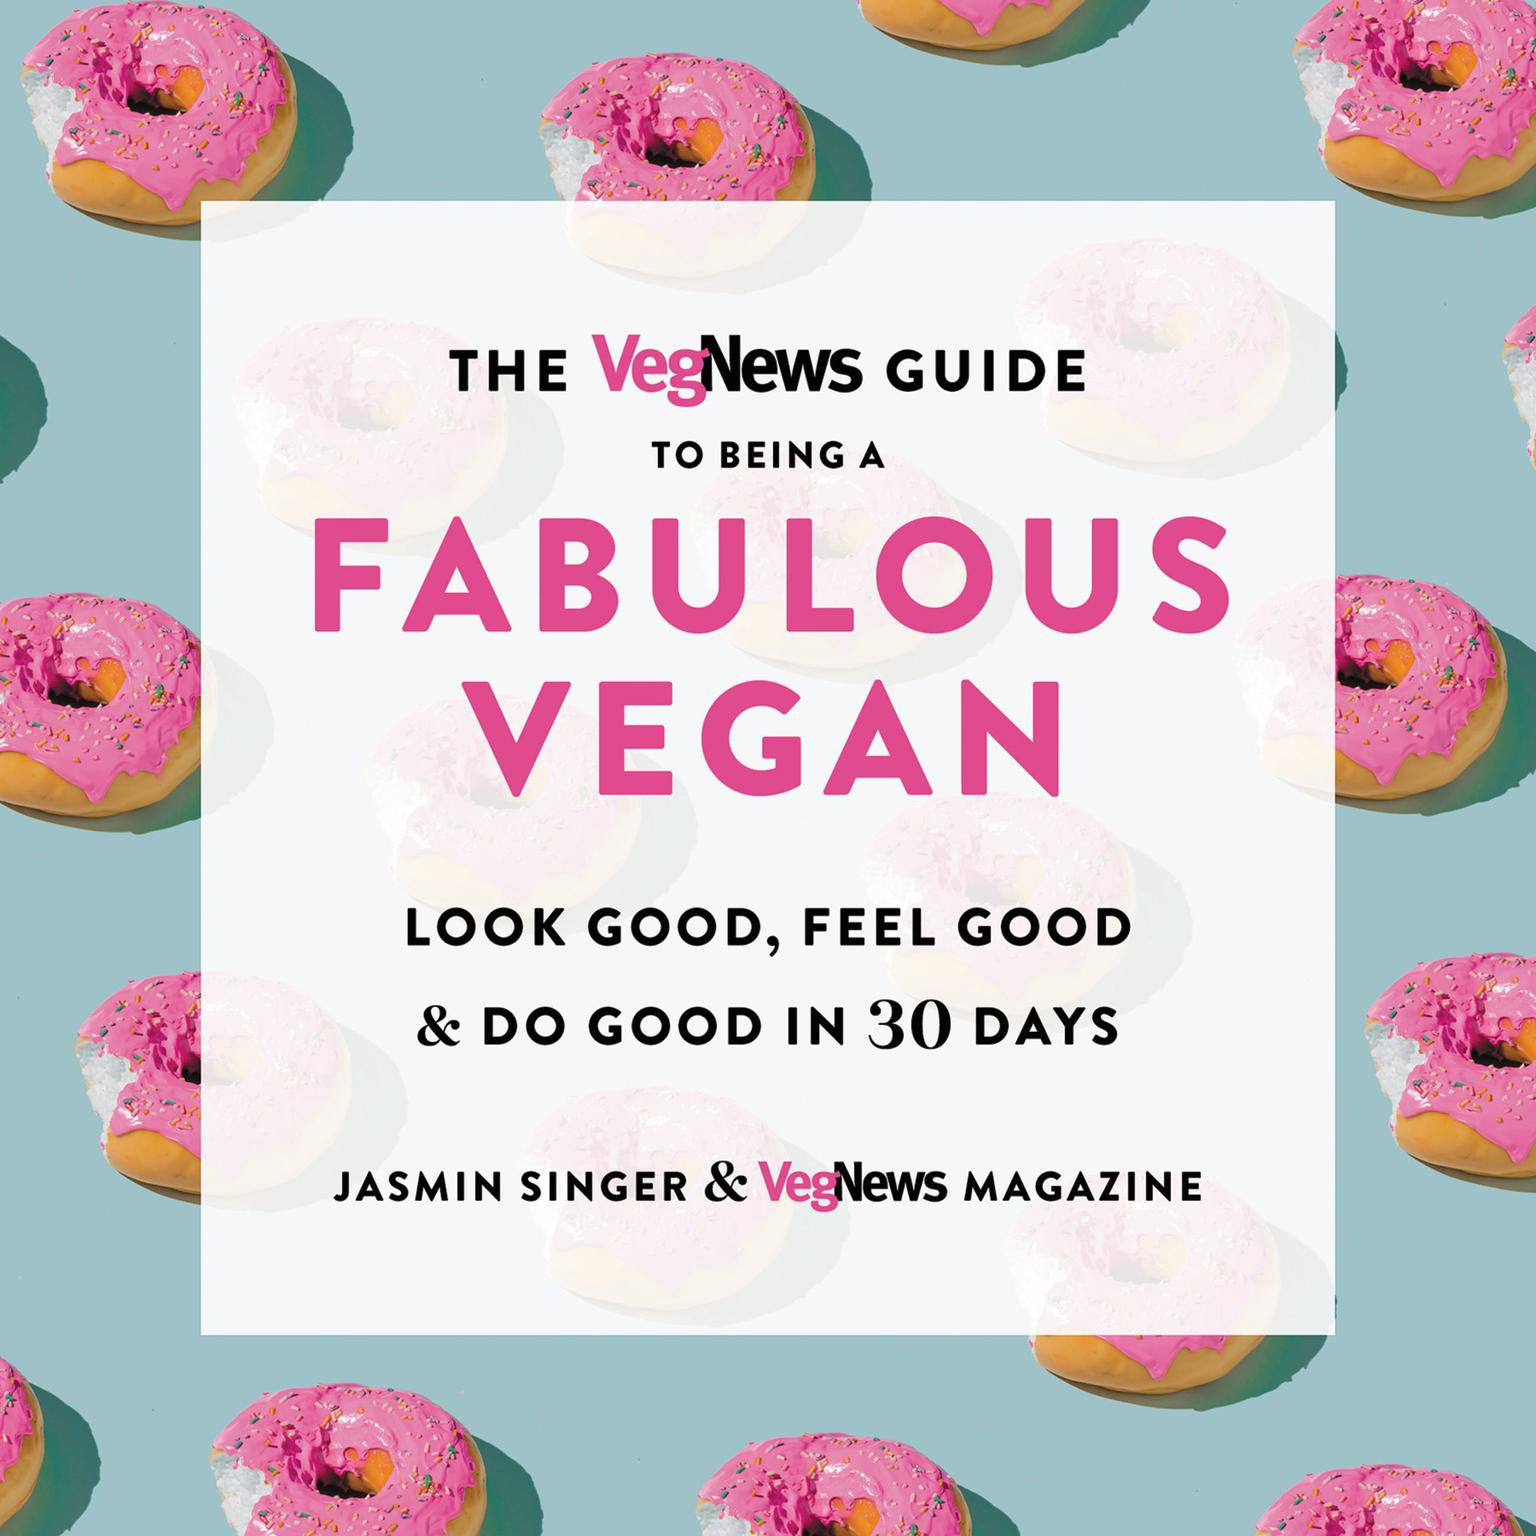 The VegNews Guide to Being a Fabulous Vegan: Look Good, Feel Good & Do Good in 30 Days Audiobook, by Jasmin Singer